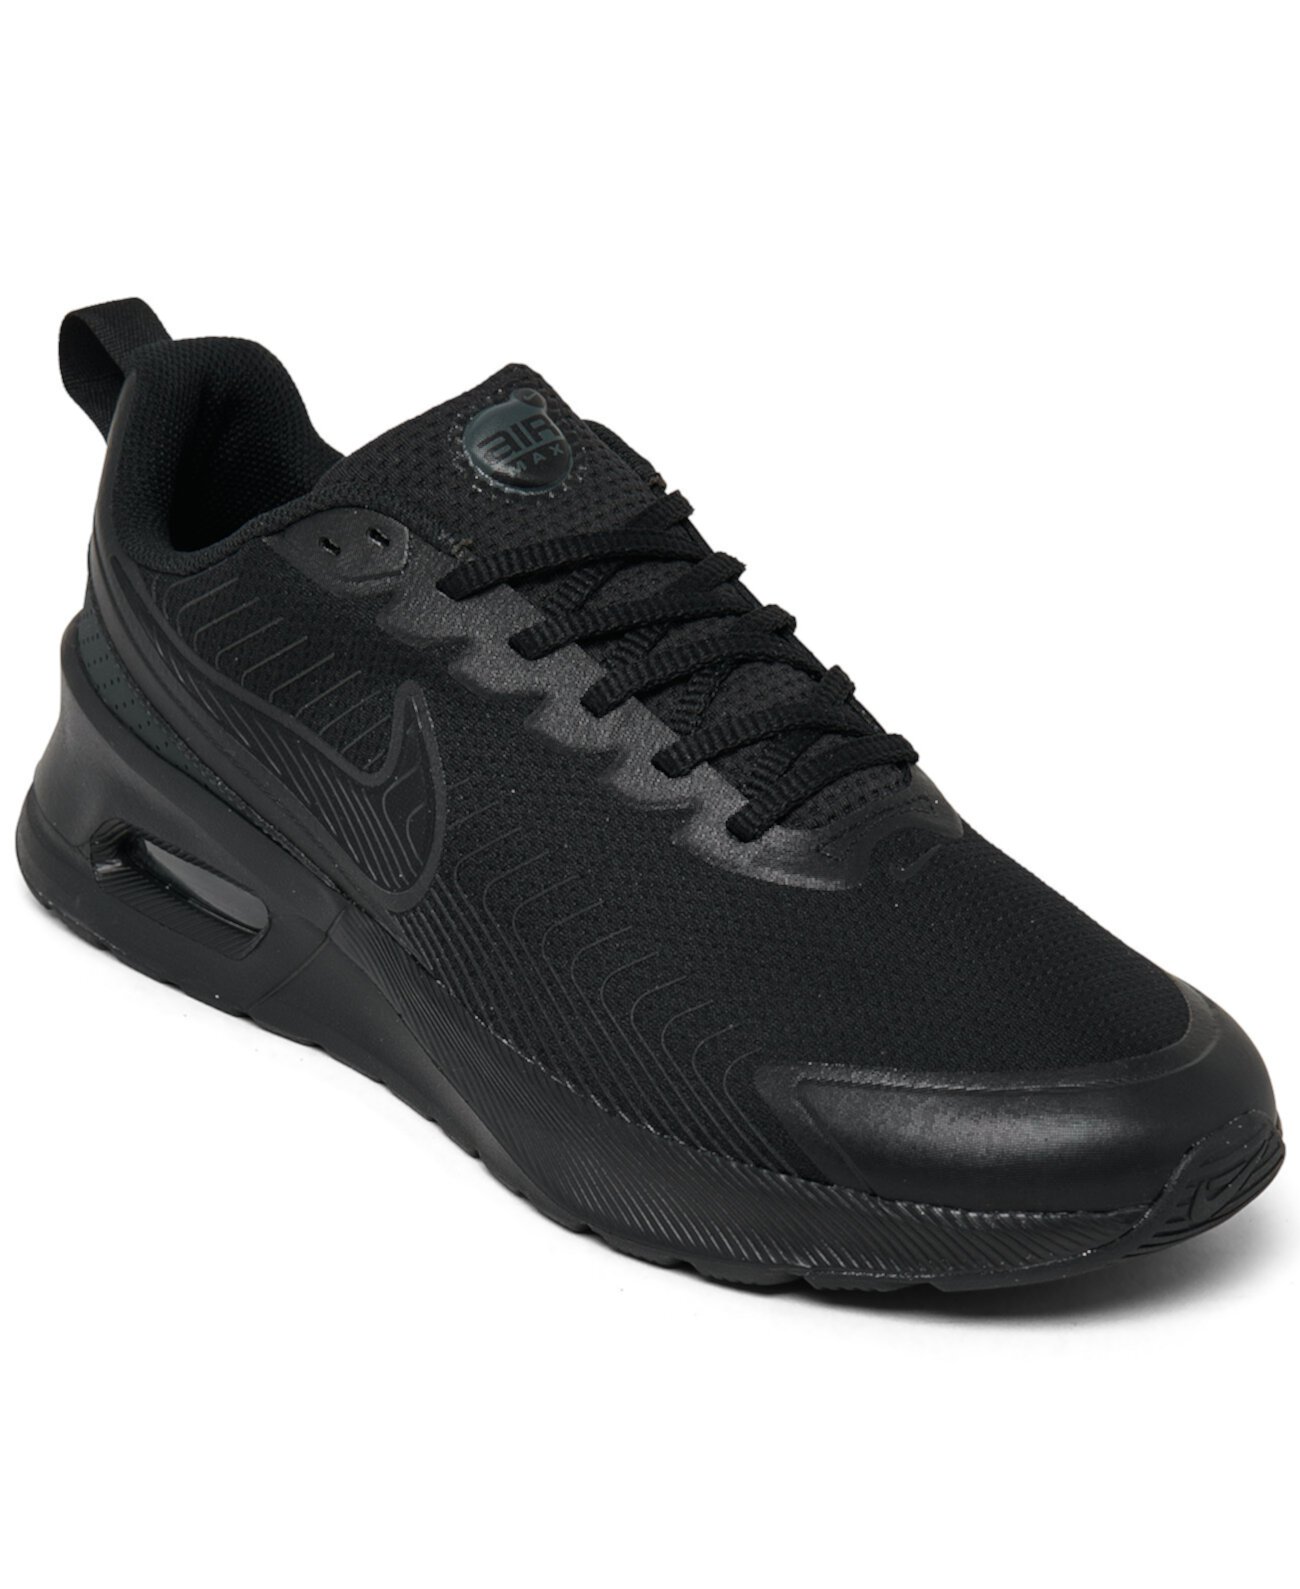 Men's Casual Sneakers from Finish Line Nike